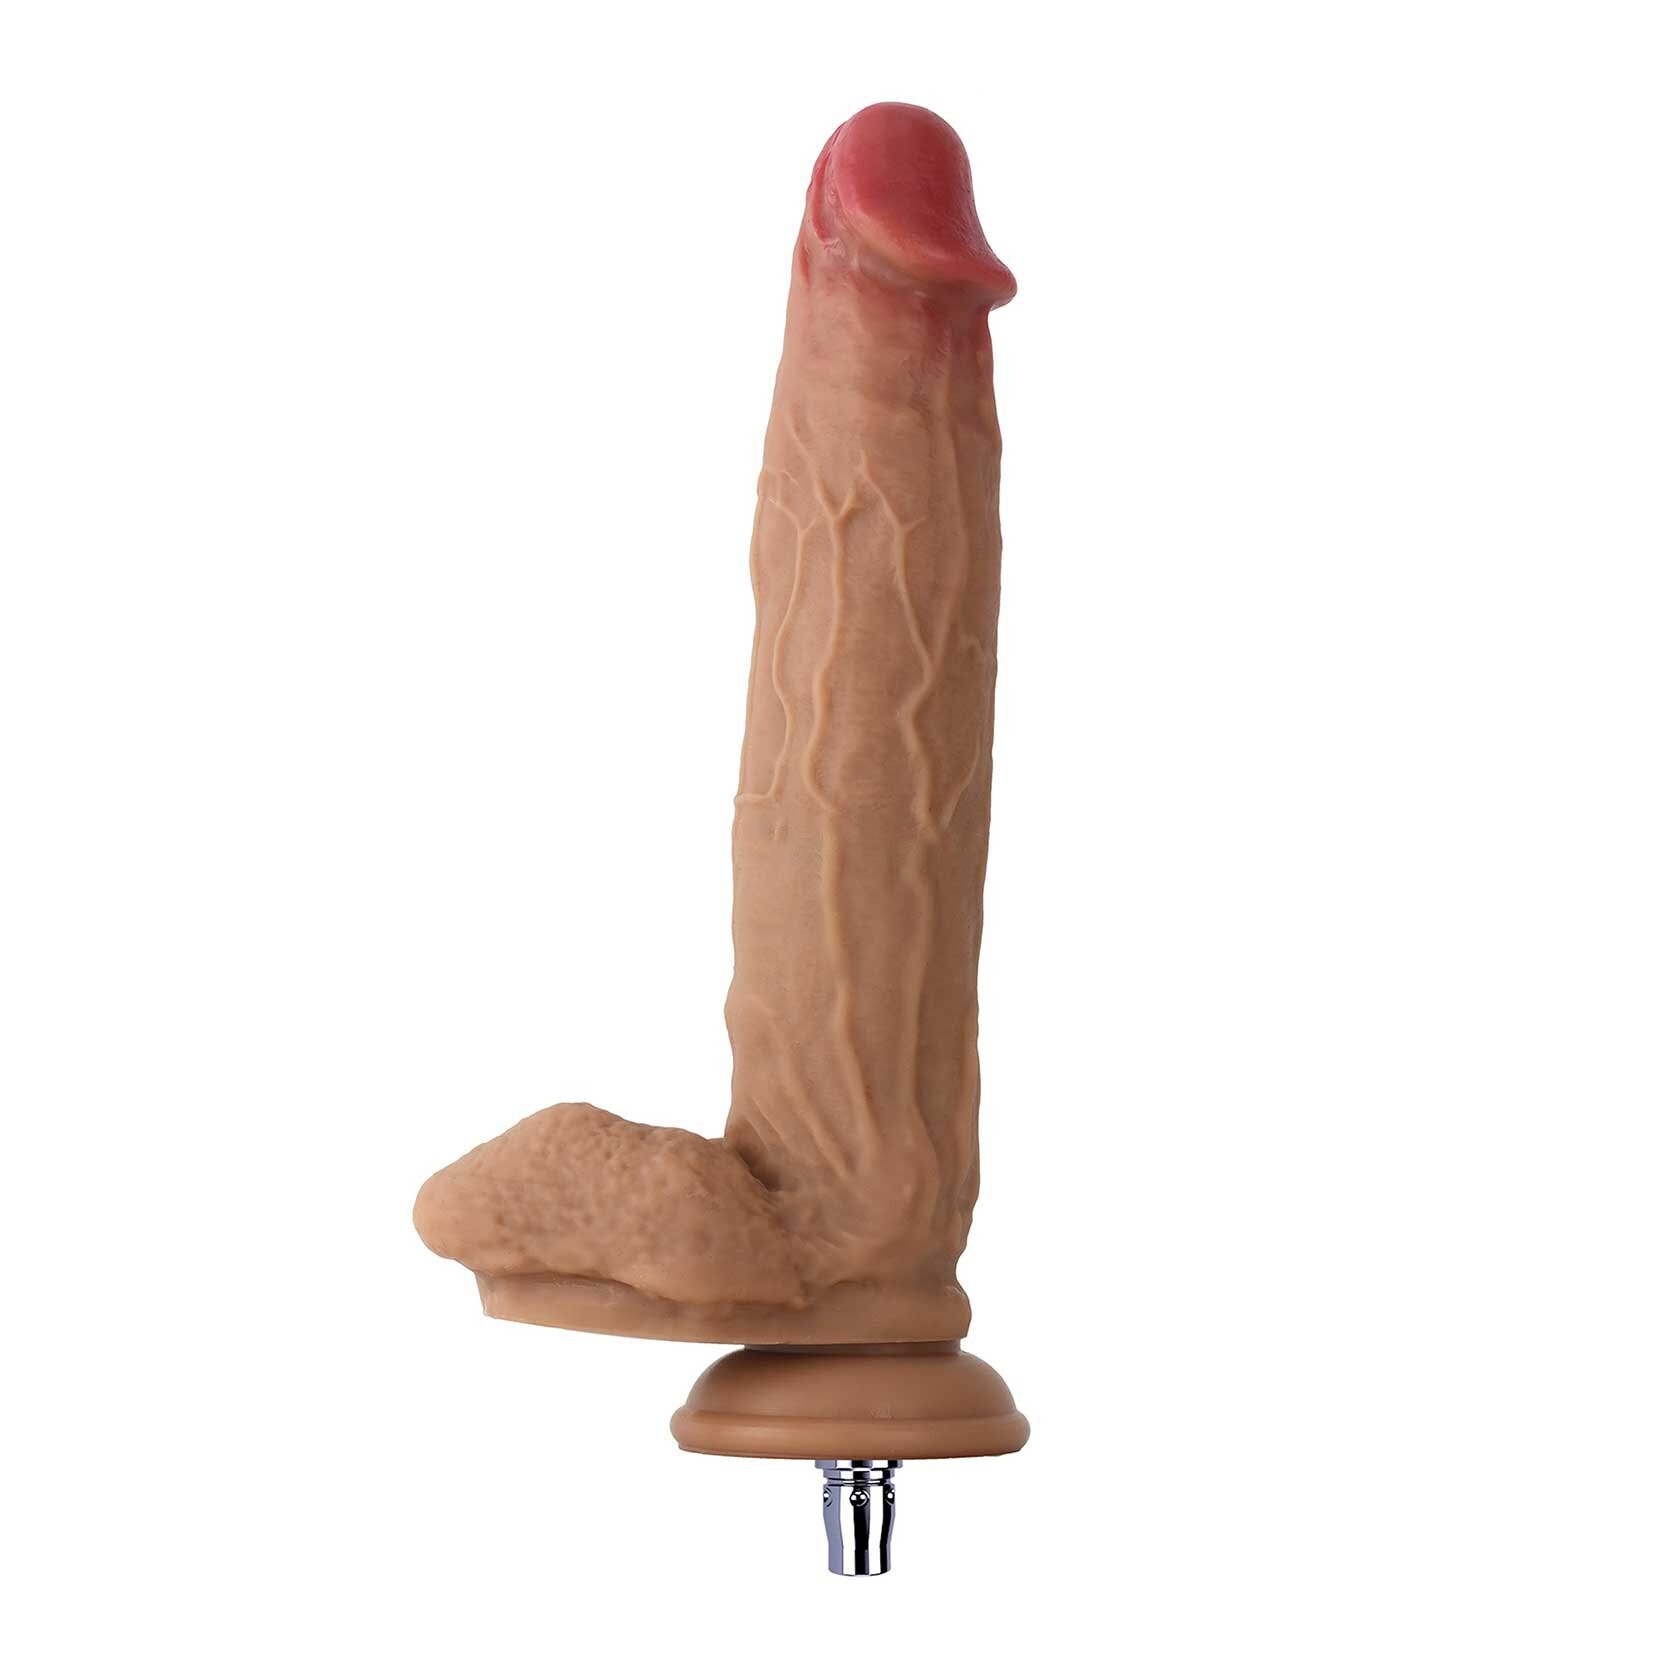 9.7 inch Bulging Veins Realistic Textured Silicone Dildo for Sex Machines